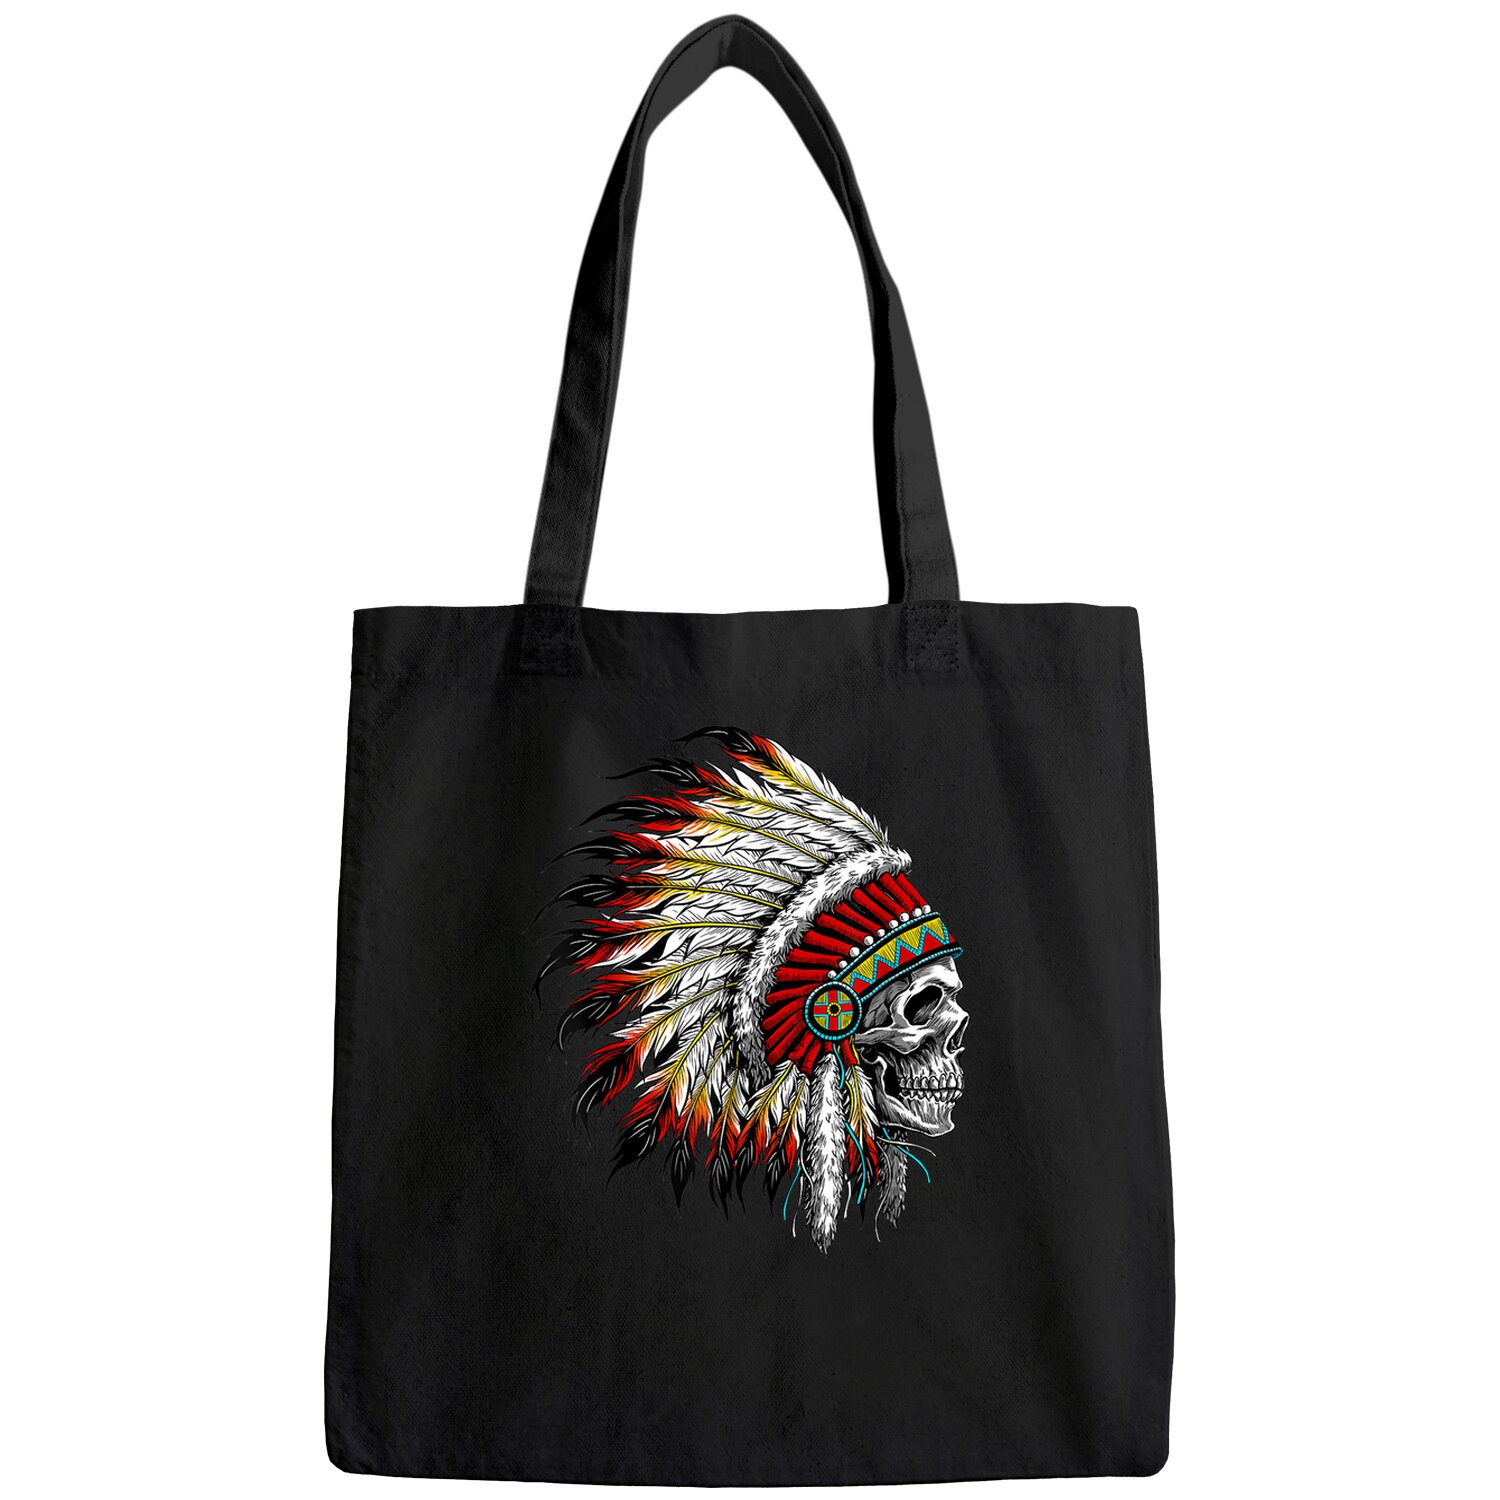 Native American Indian Chief Skull Motorcycle Headdress Tote Bag